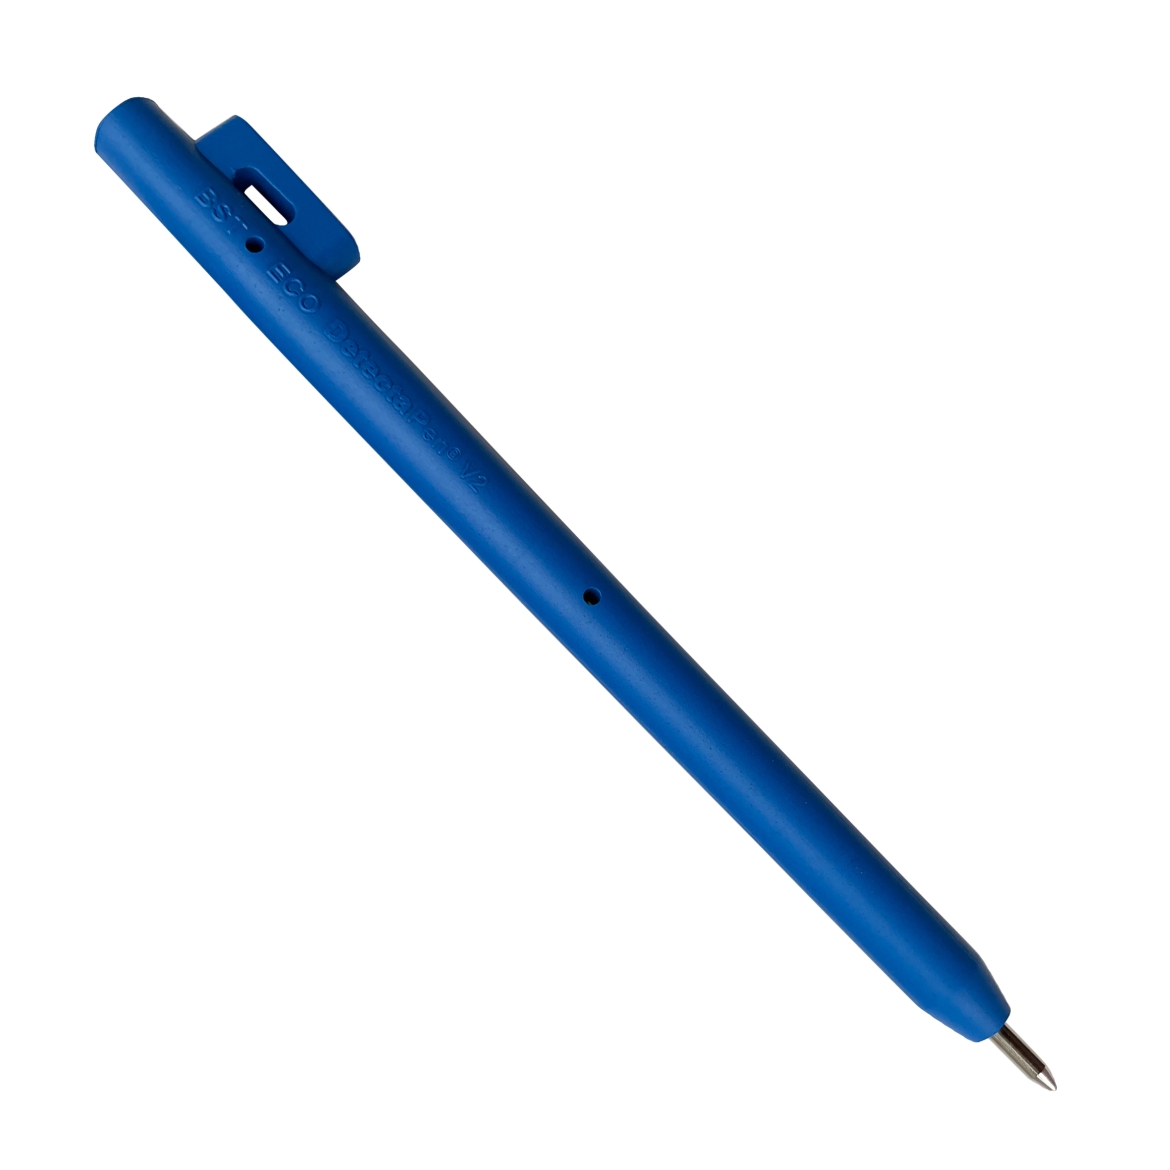 Eco v2 Metal detectable pen with loop